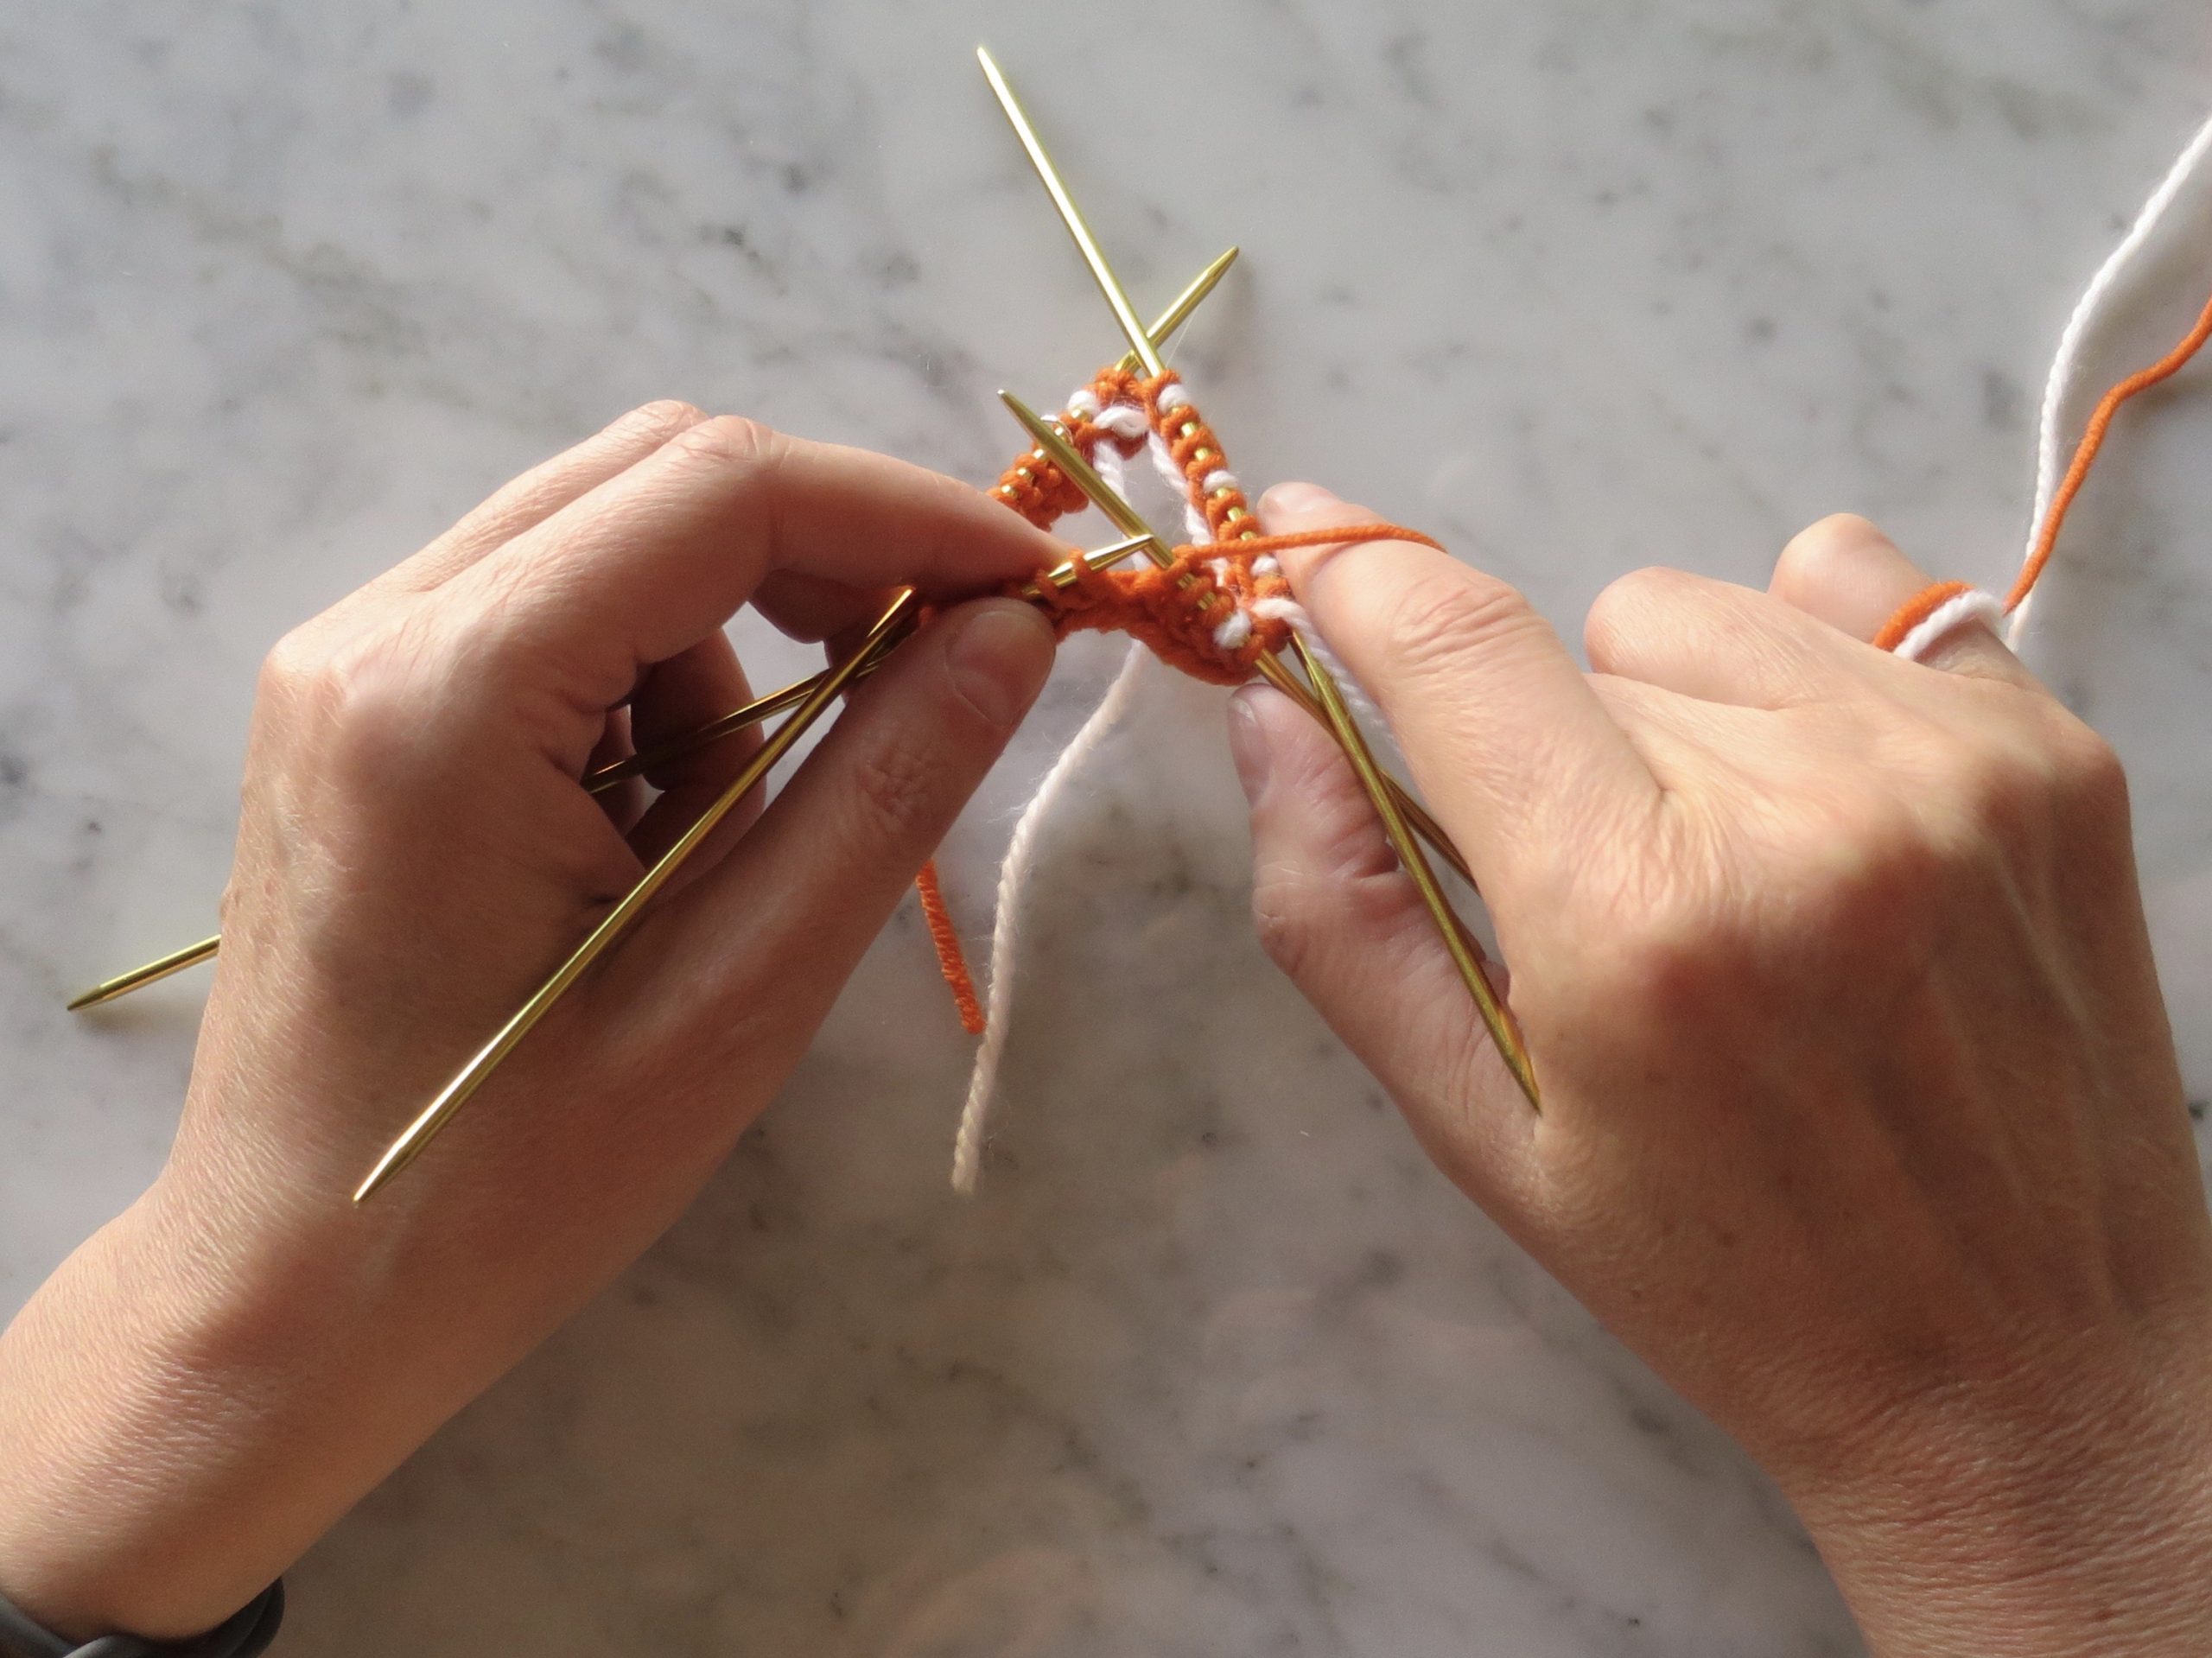 hands knitting in the round on double pointed needles with orange and white yarn